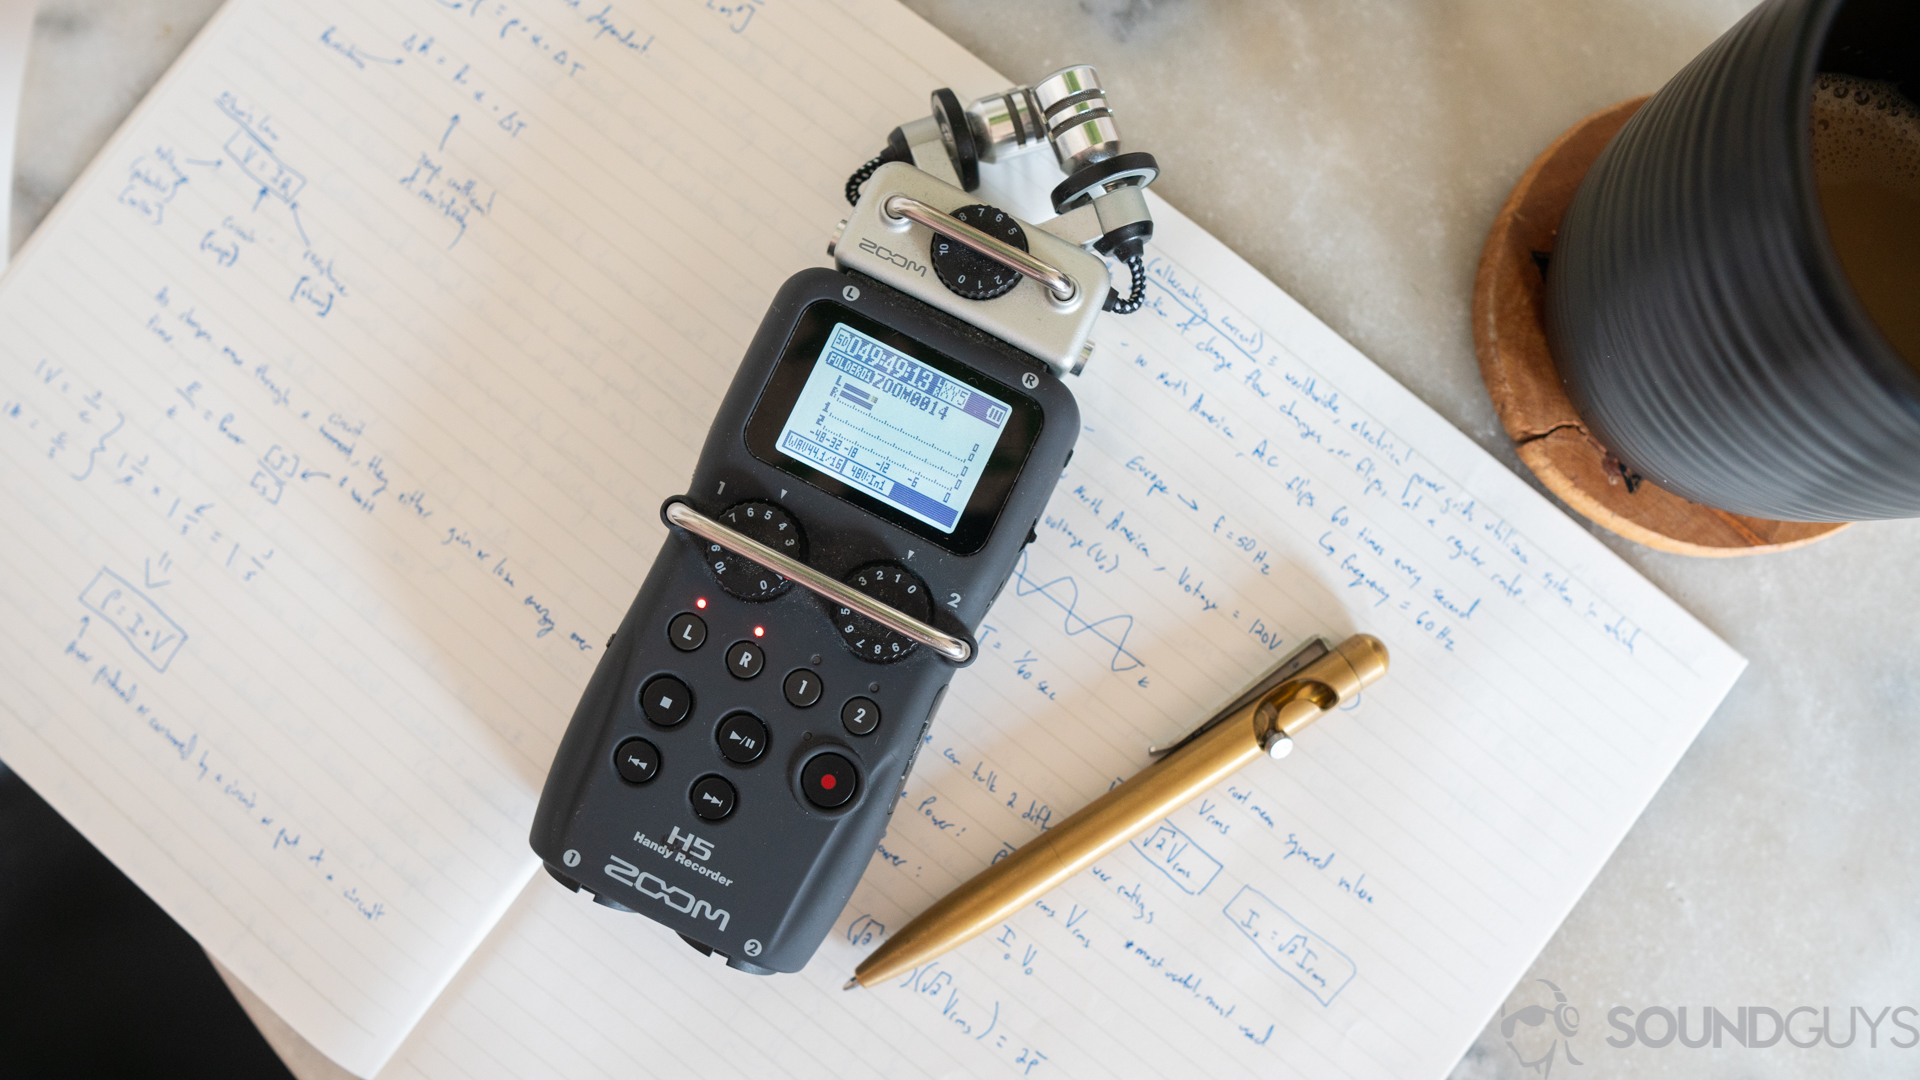 Zoom H5 digital recorder with notebook and pen